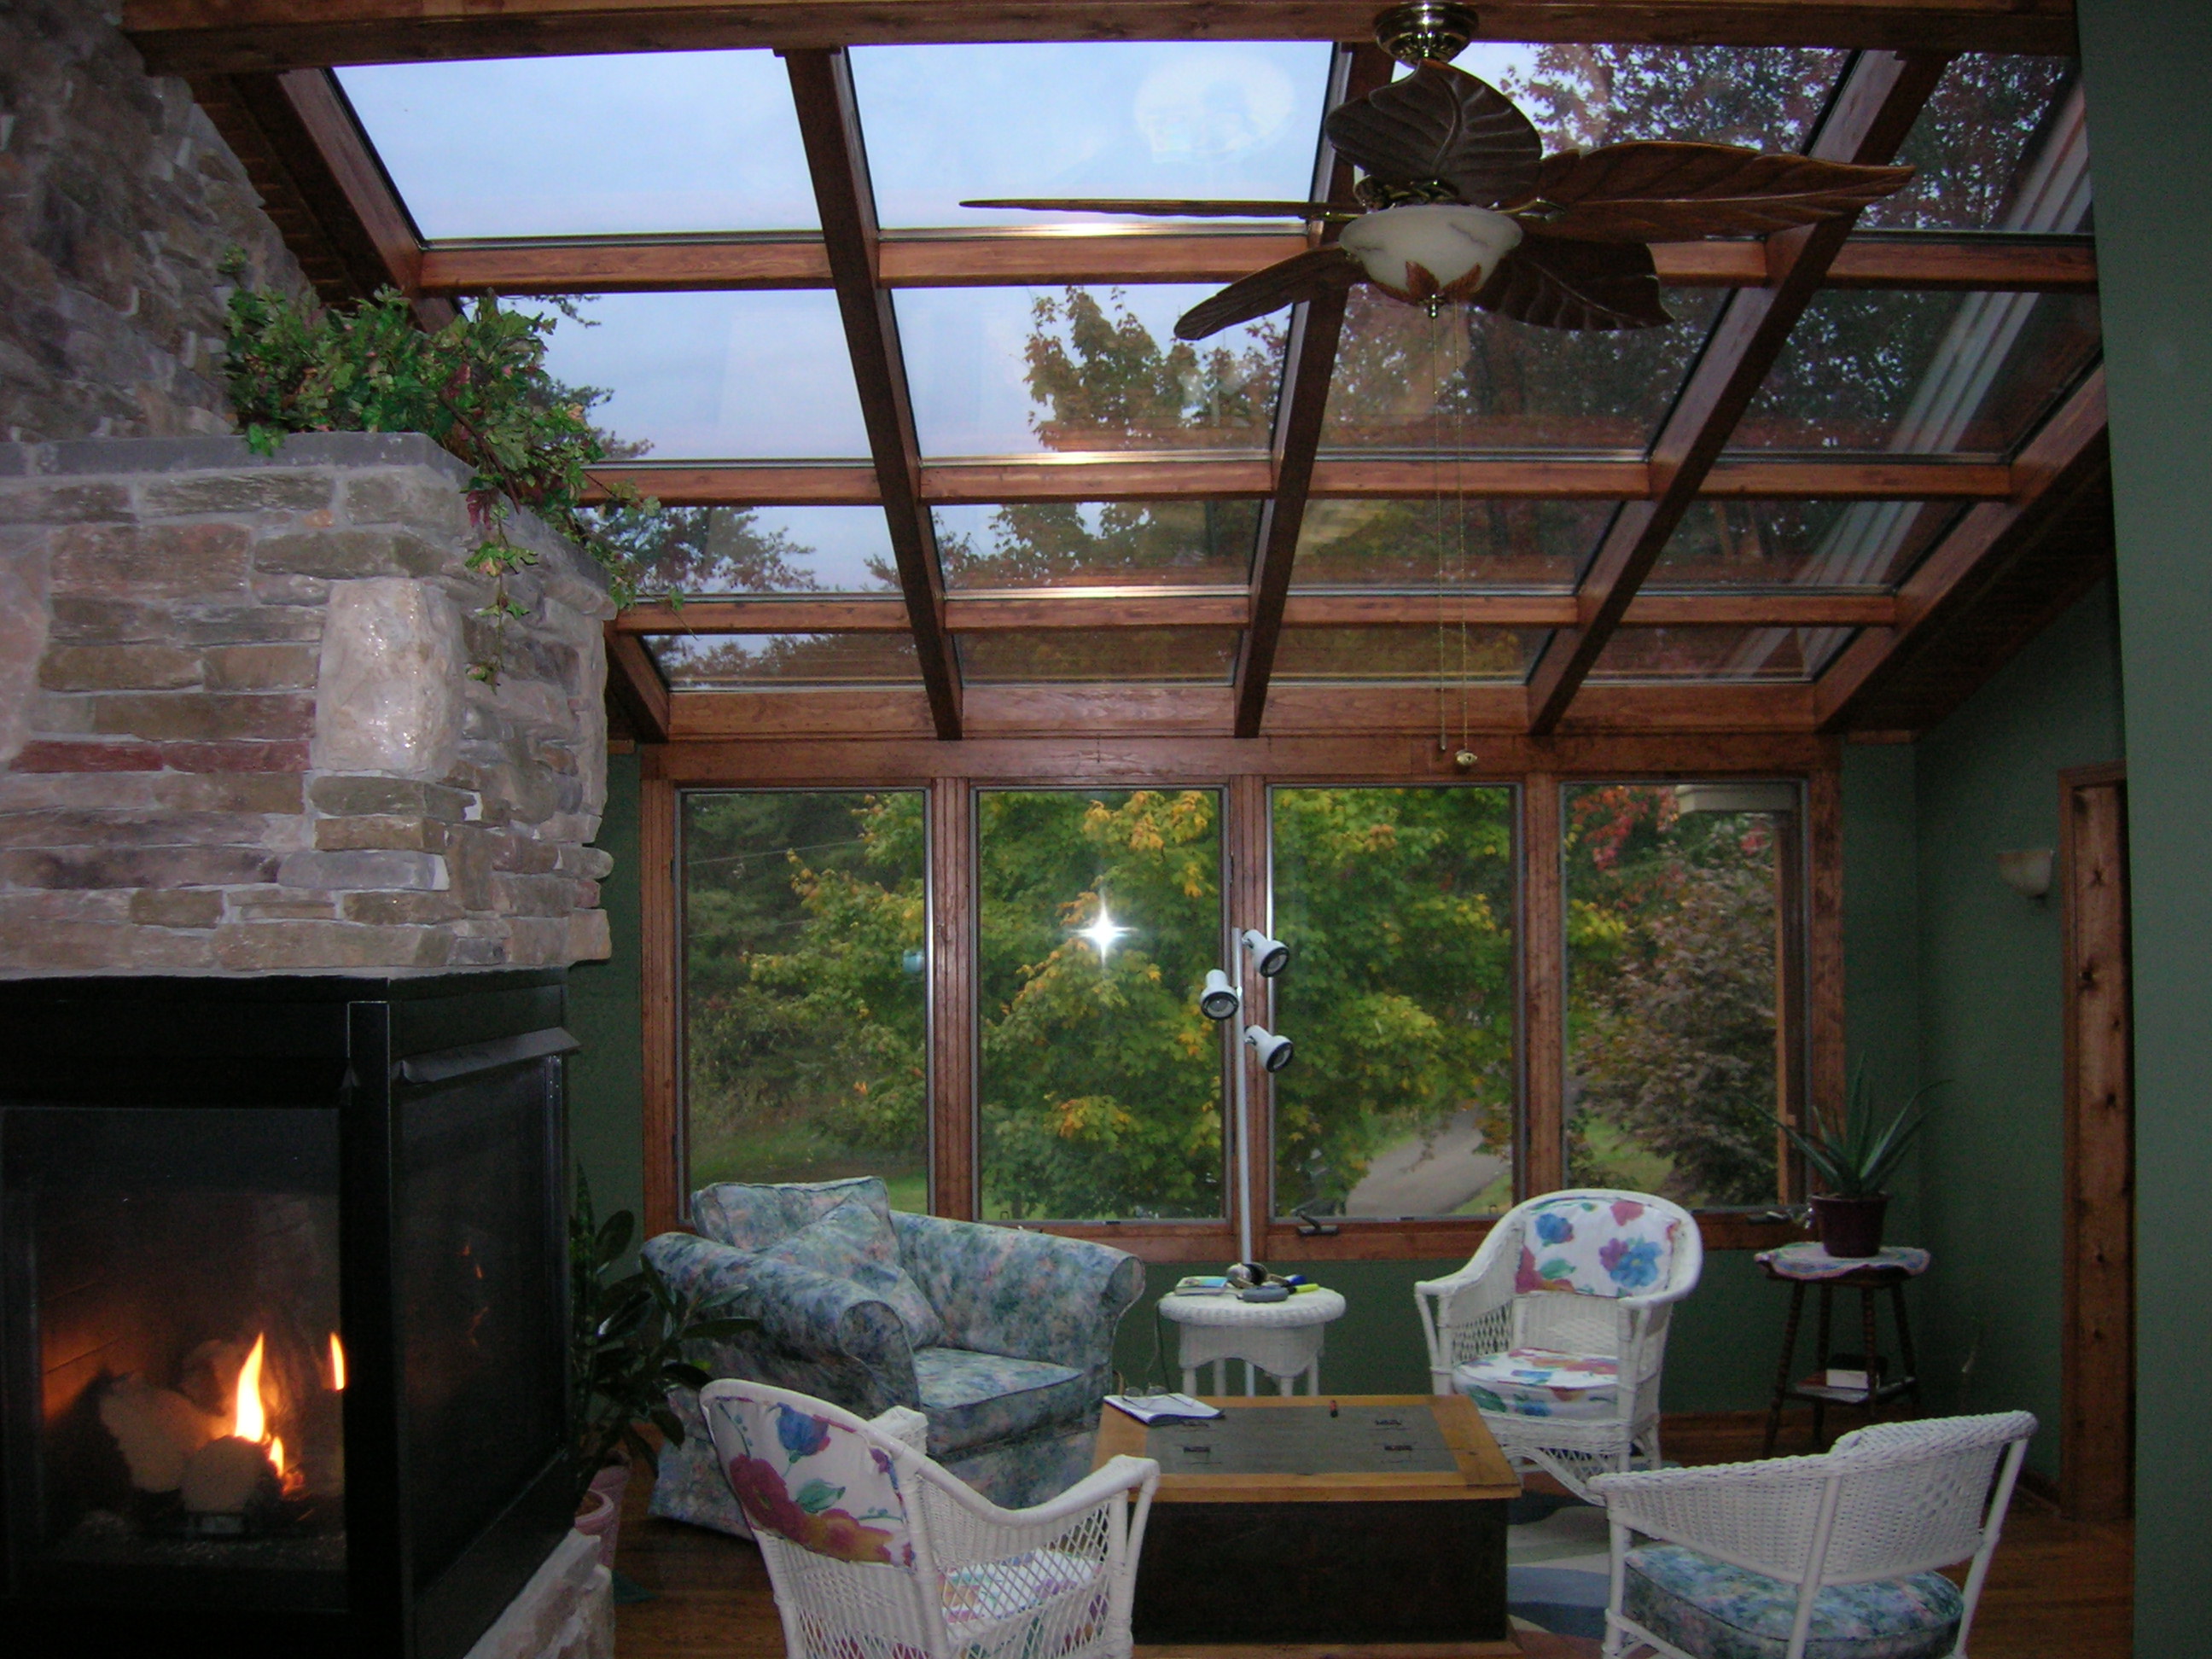 Straight Eave Wood Glass Roof Design Northern White Pine interior and white exterior 